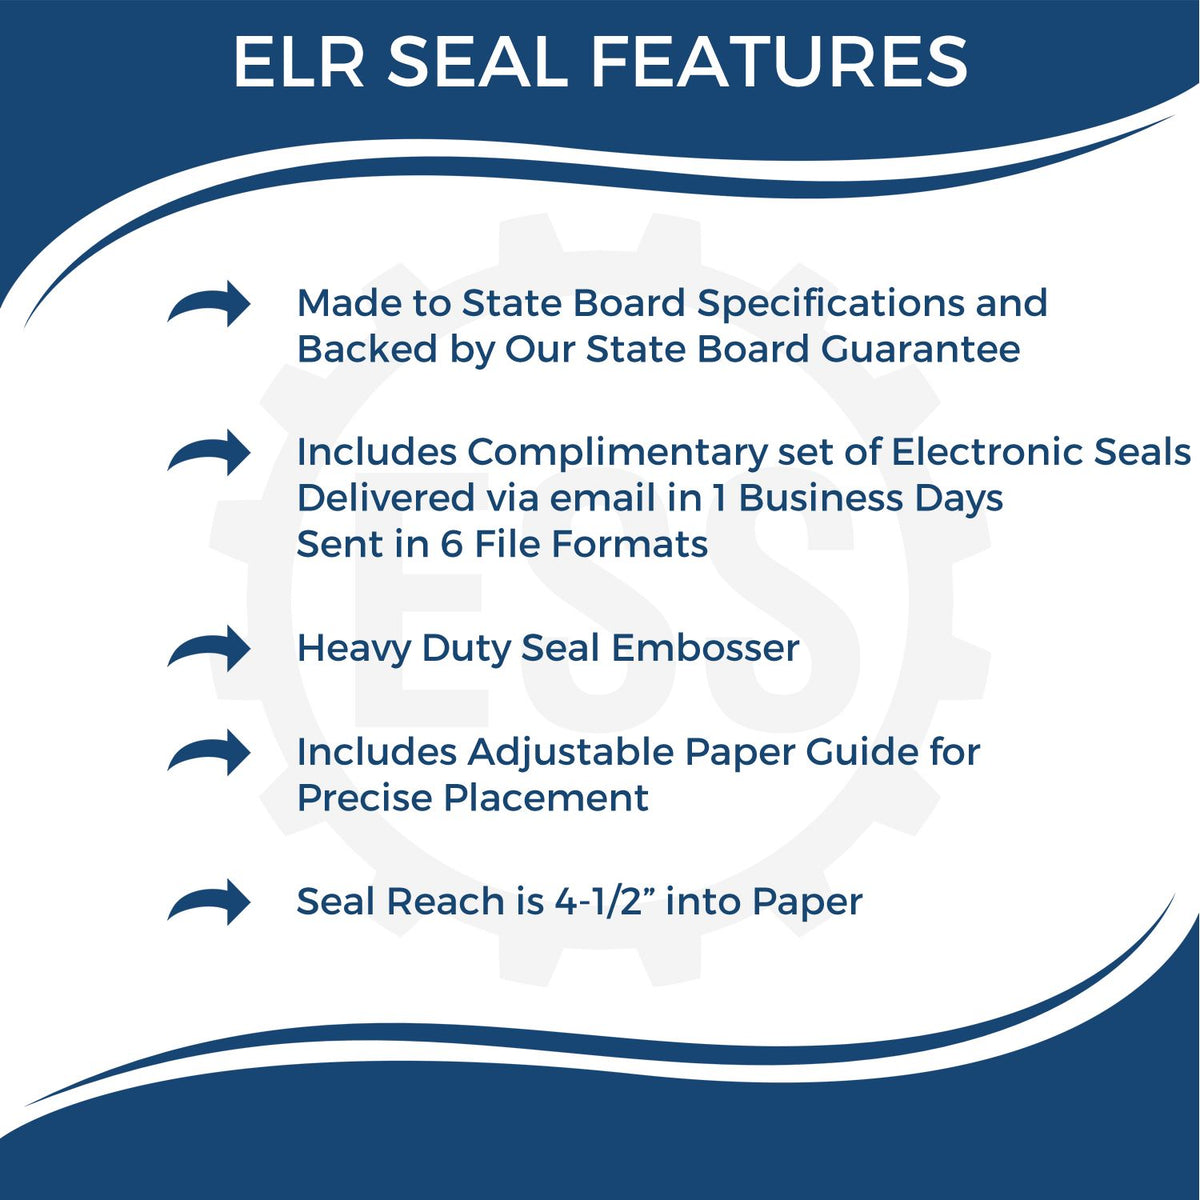 A picture of an infographic highlighting the selling points for the State of Maine Extended Long Reach Geologist Seal